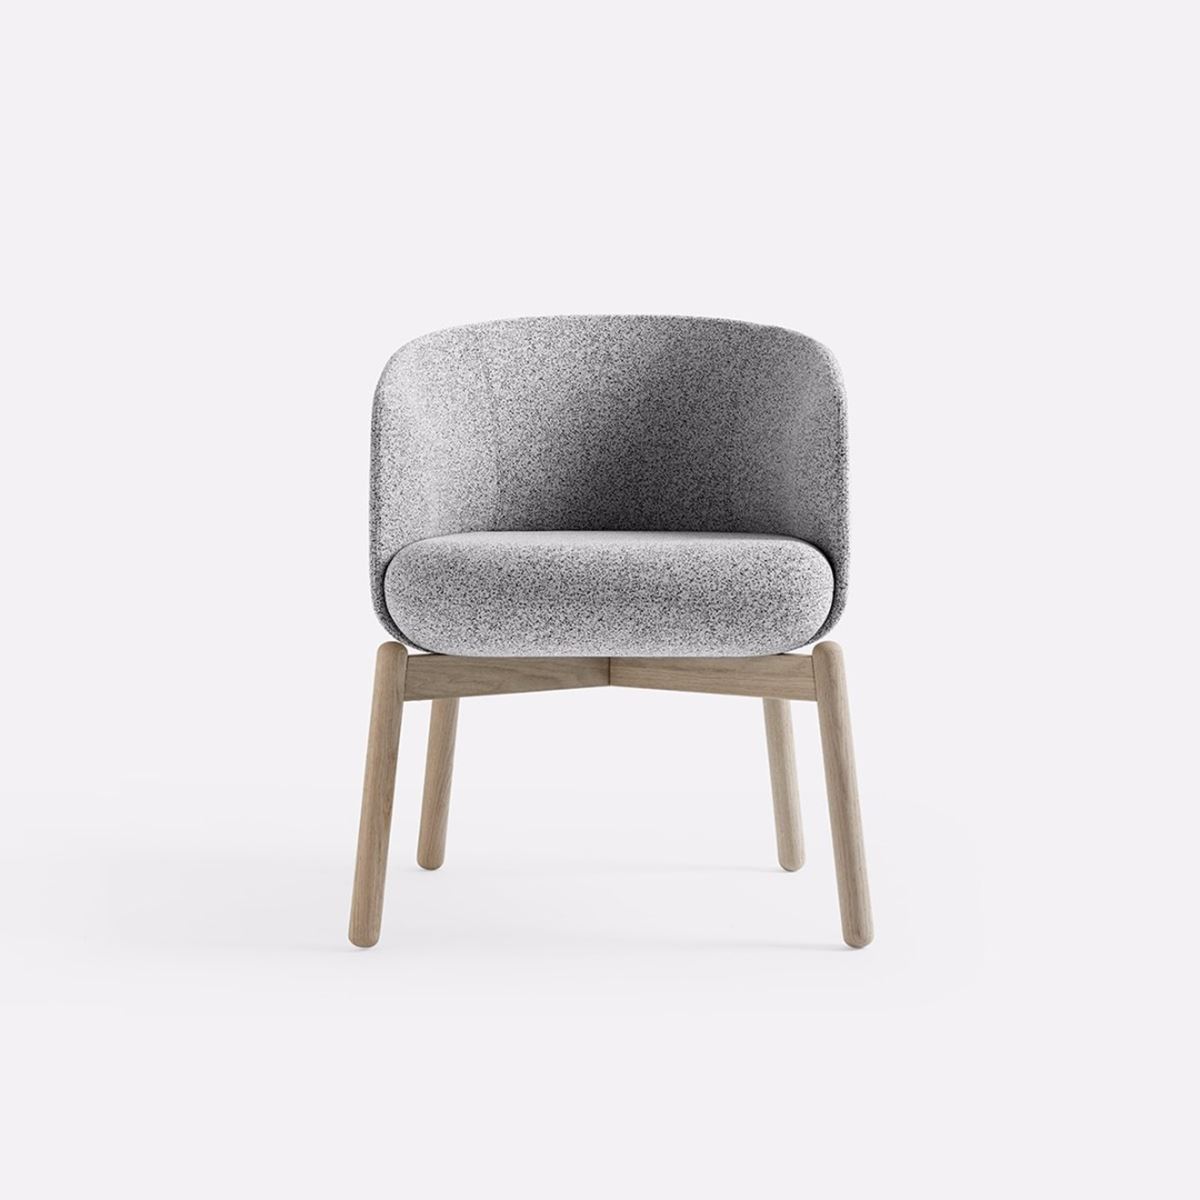 Nest Wood Low Chair